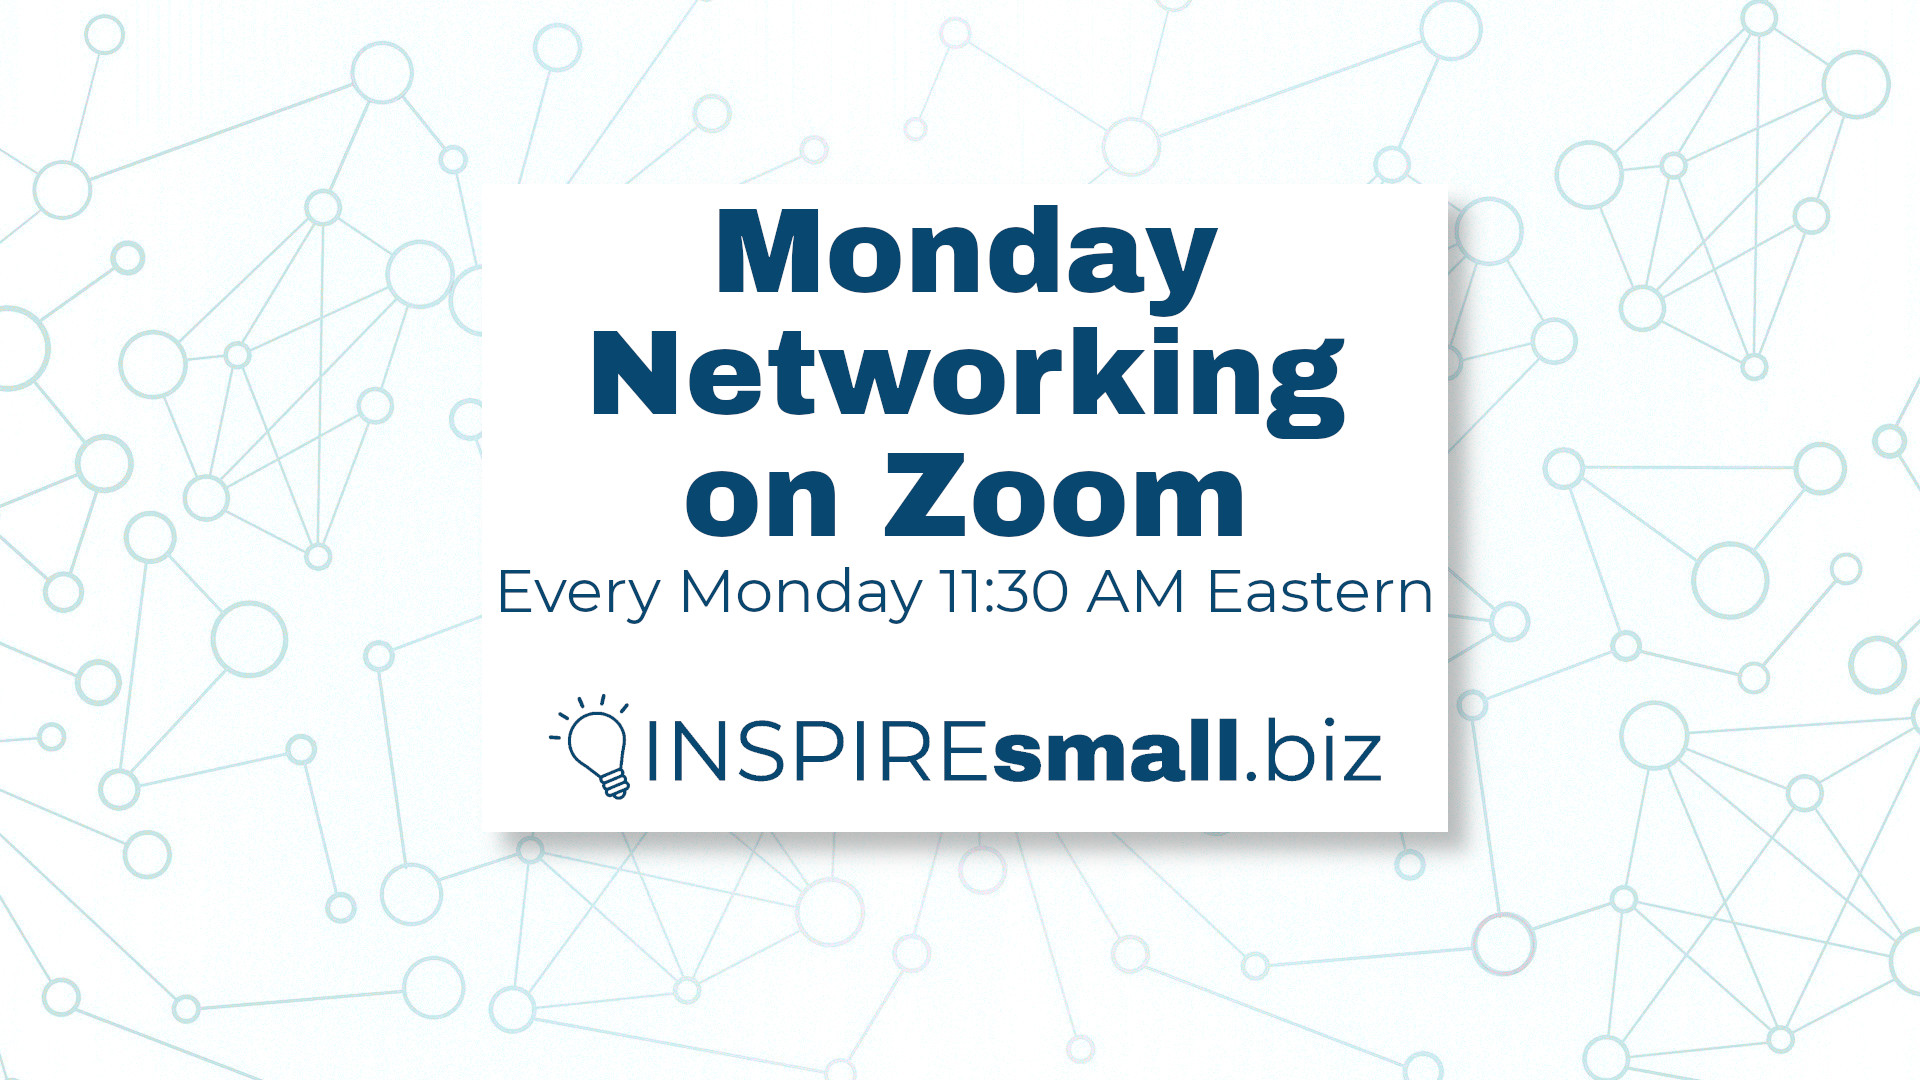 Monday Networking on Zoom - Every Monday 11:30 AM Eastern, hosted by INSPIREsmall.biz